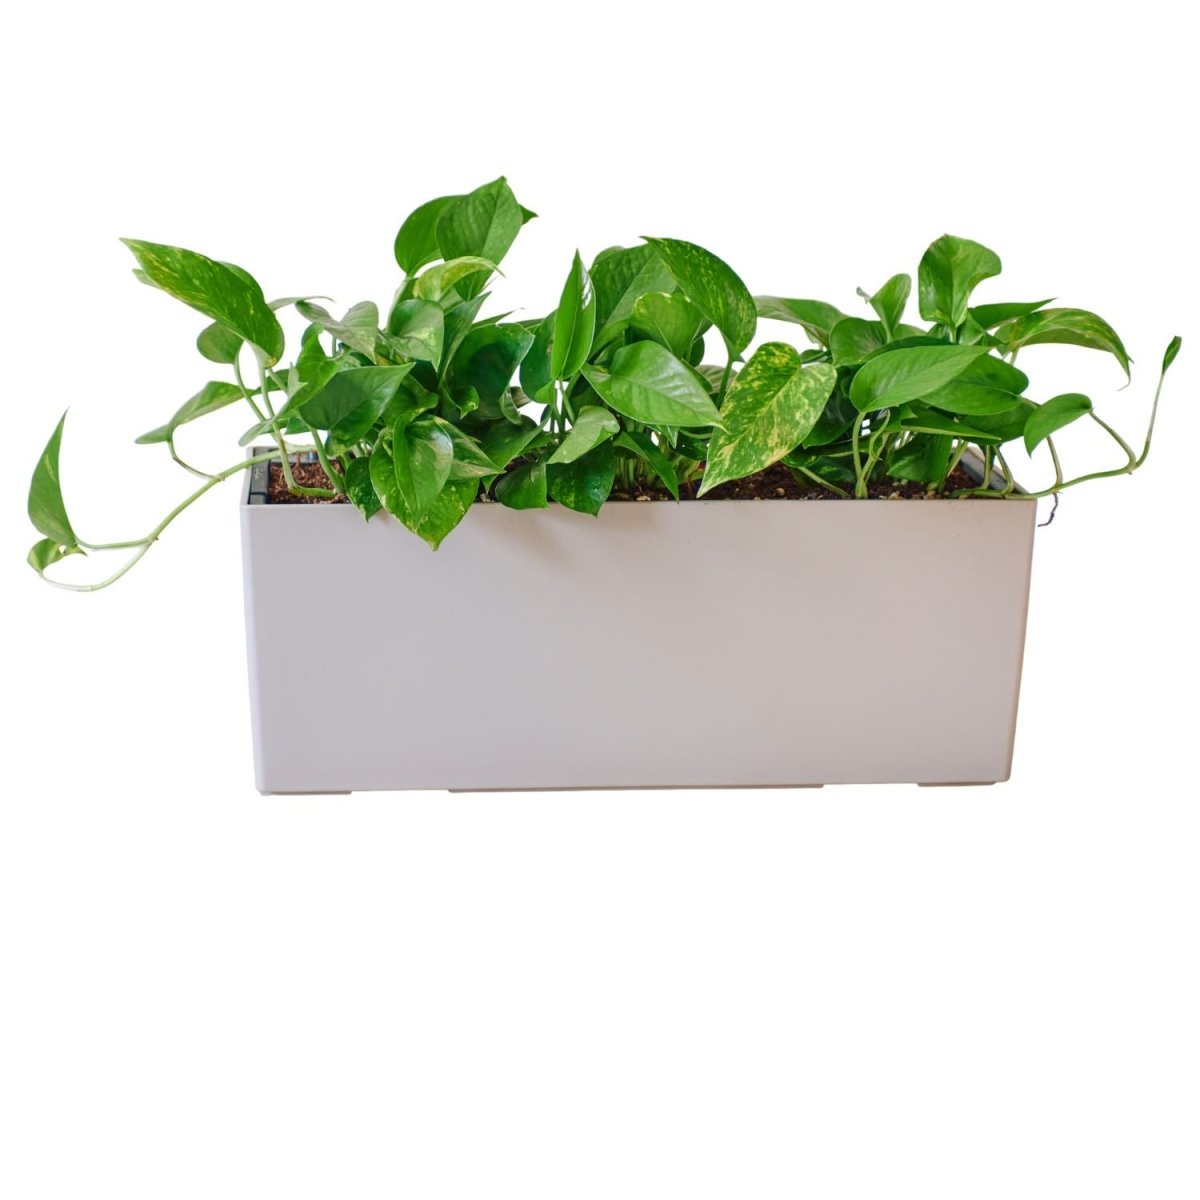 Pothos Potted In Lechuza Balconera Planter - Sand Brown - My City Plants